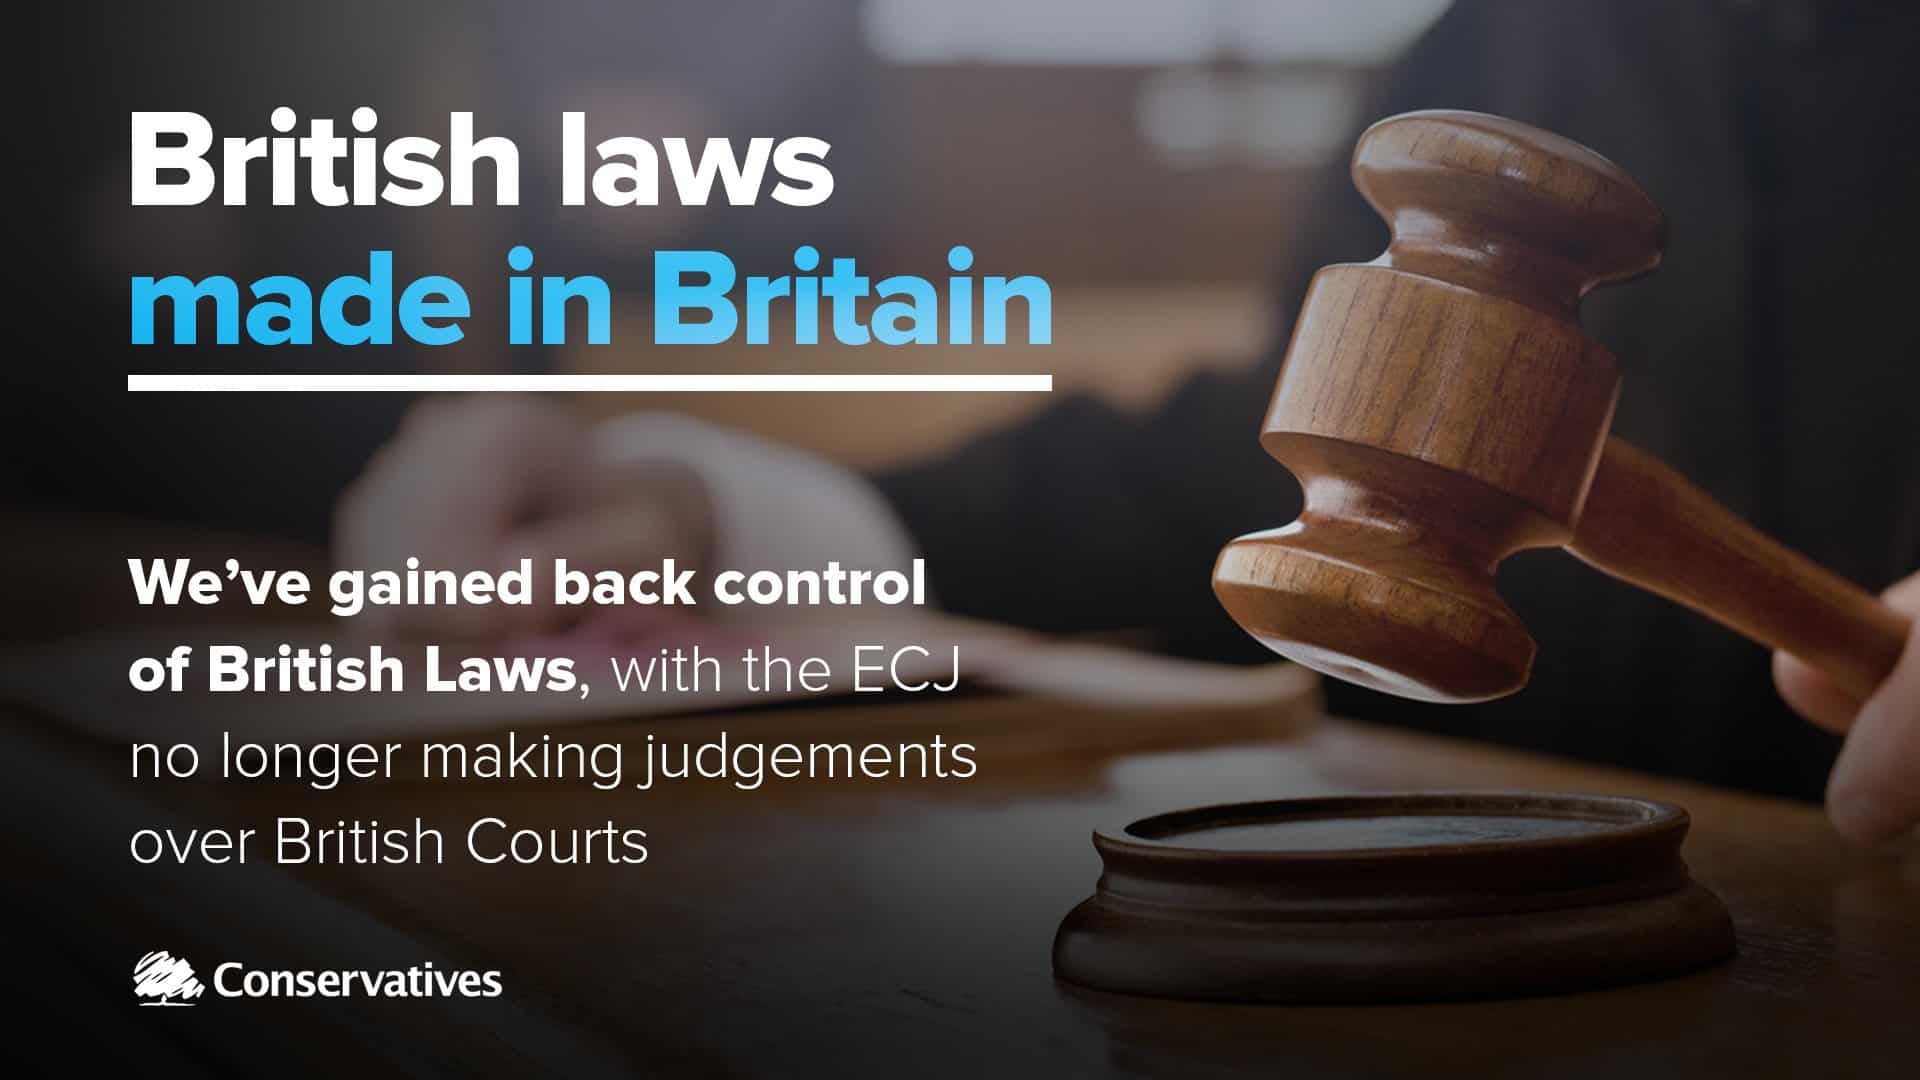 “British laws made in Britain” tweet comes back to haunt Conservatives